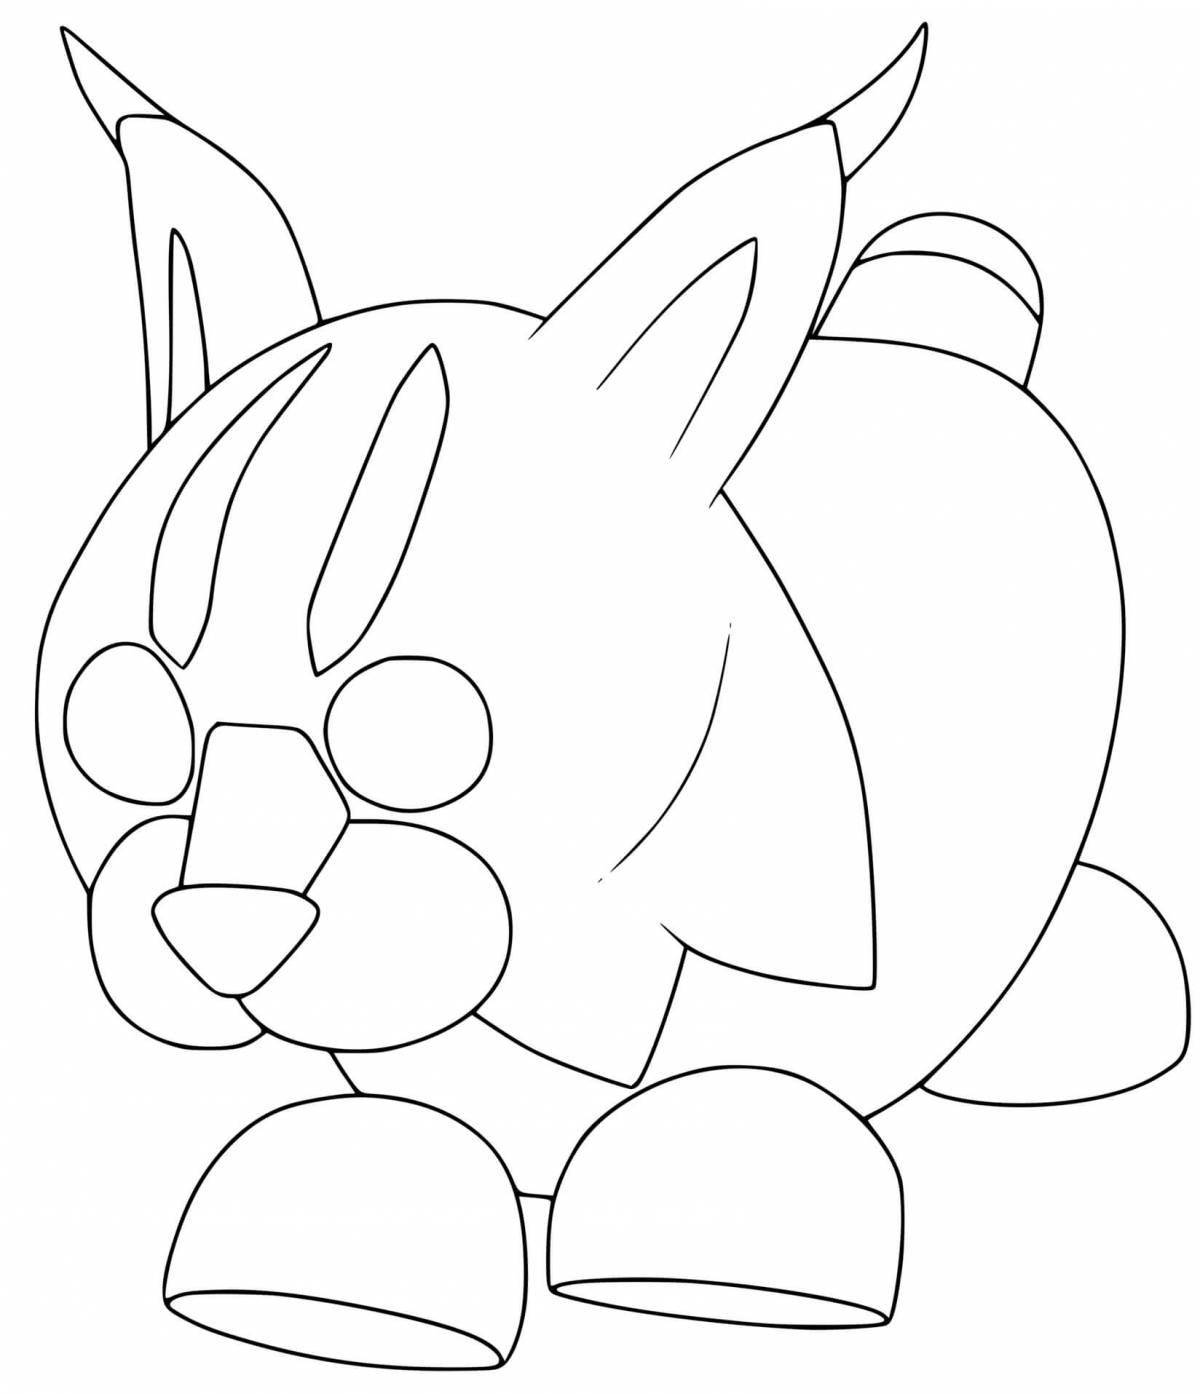 Playable adopt me eggs coloring page